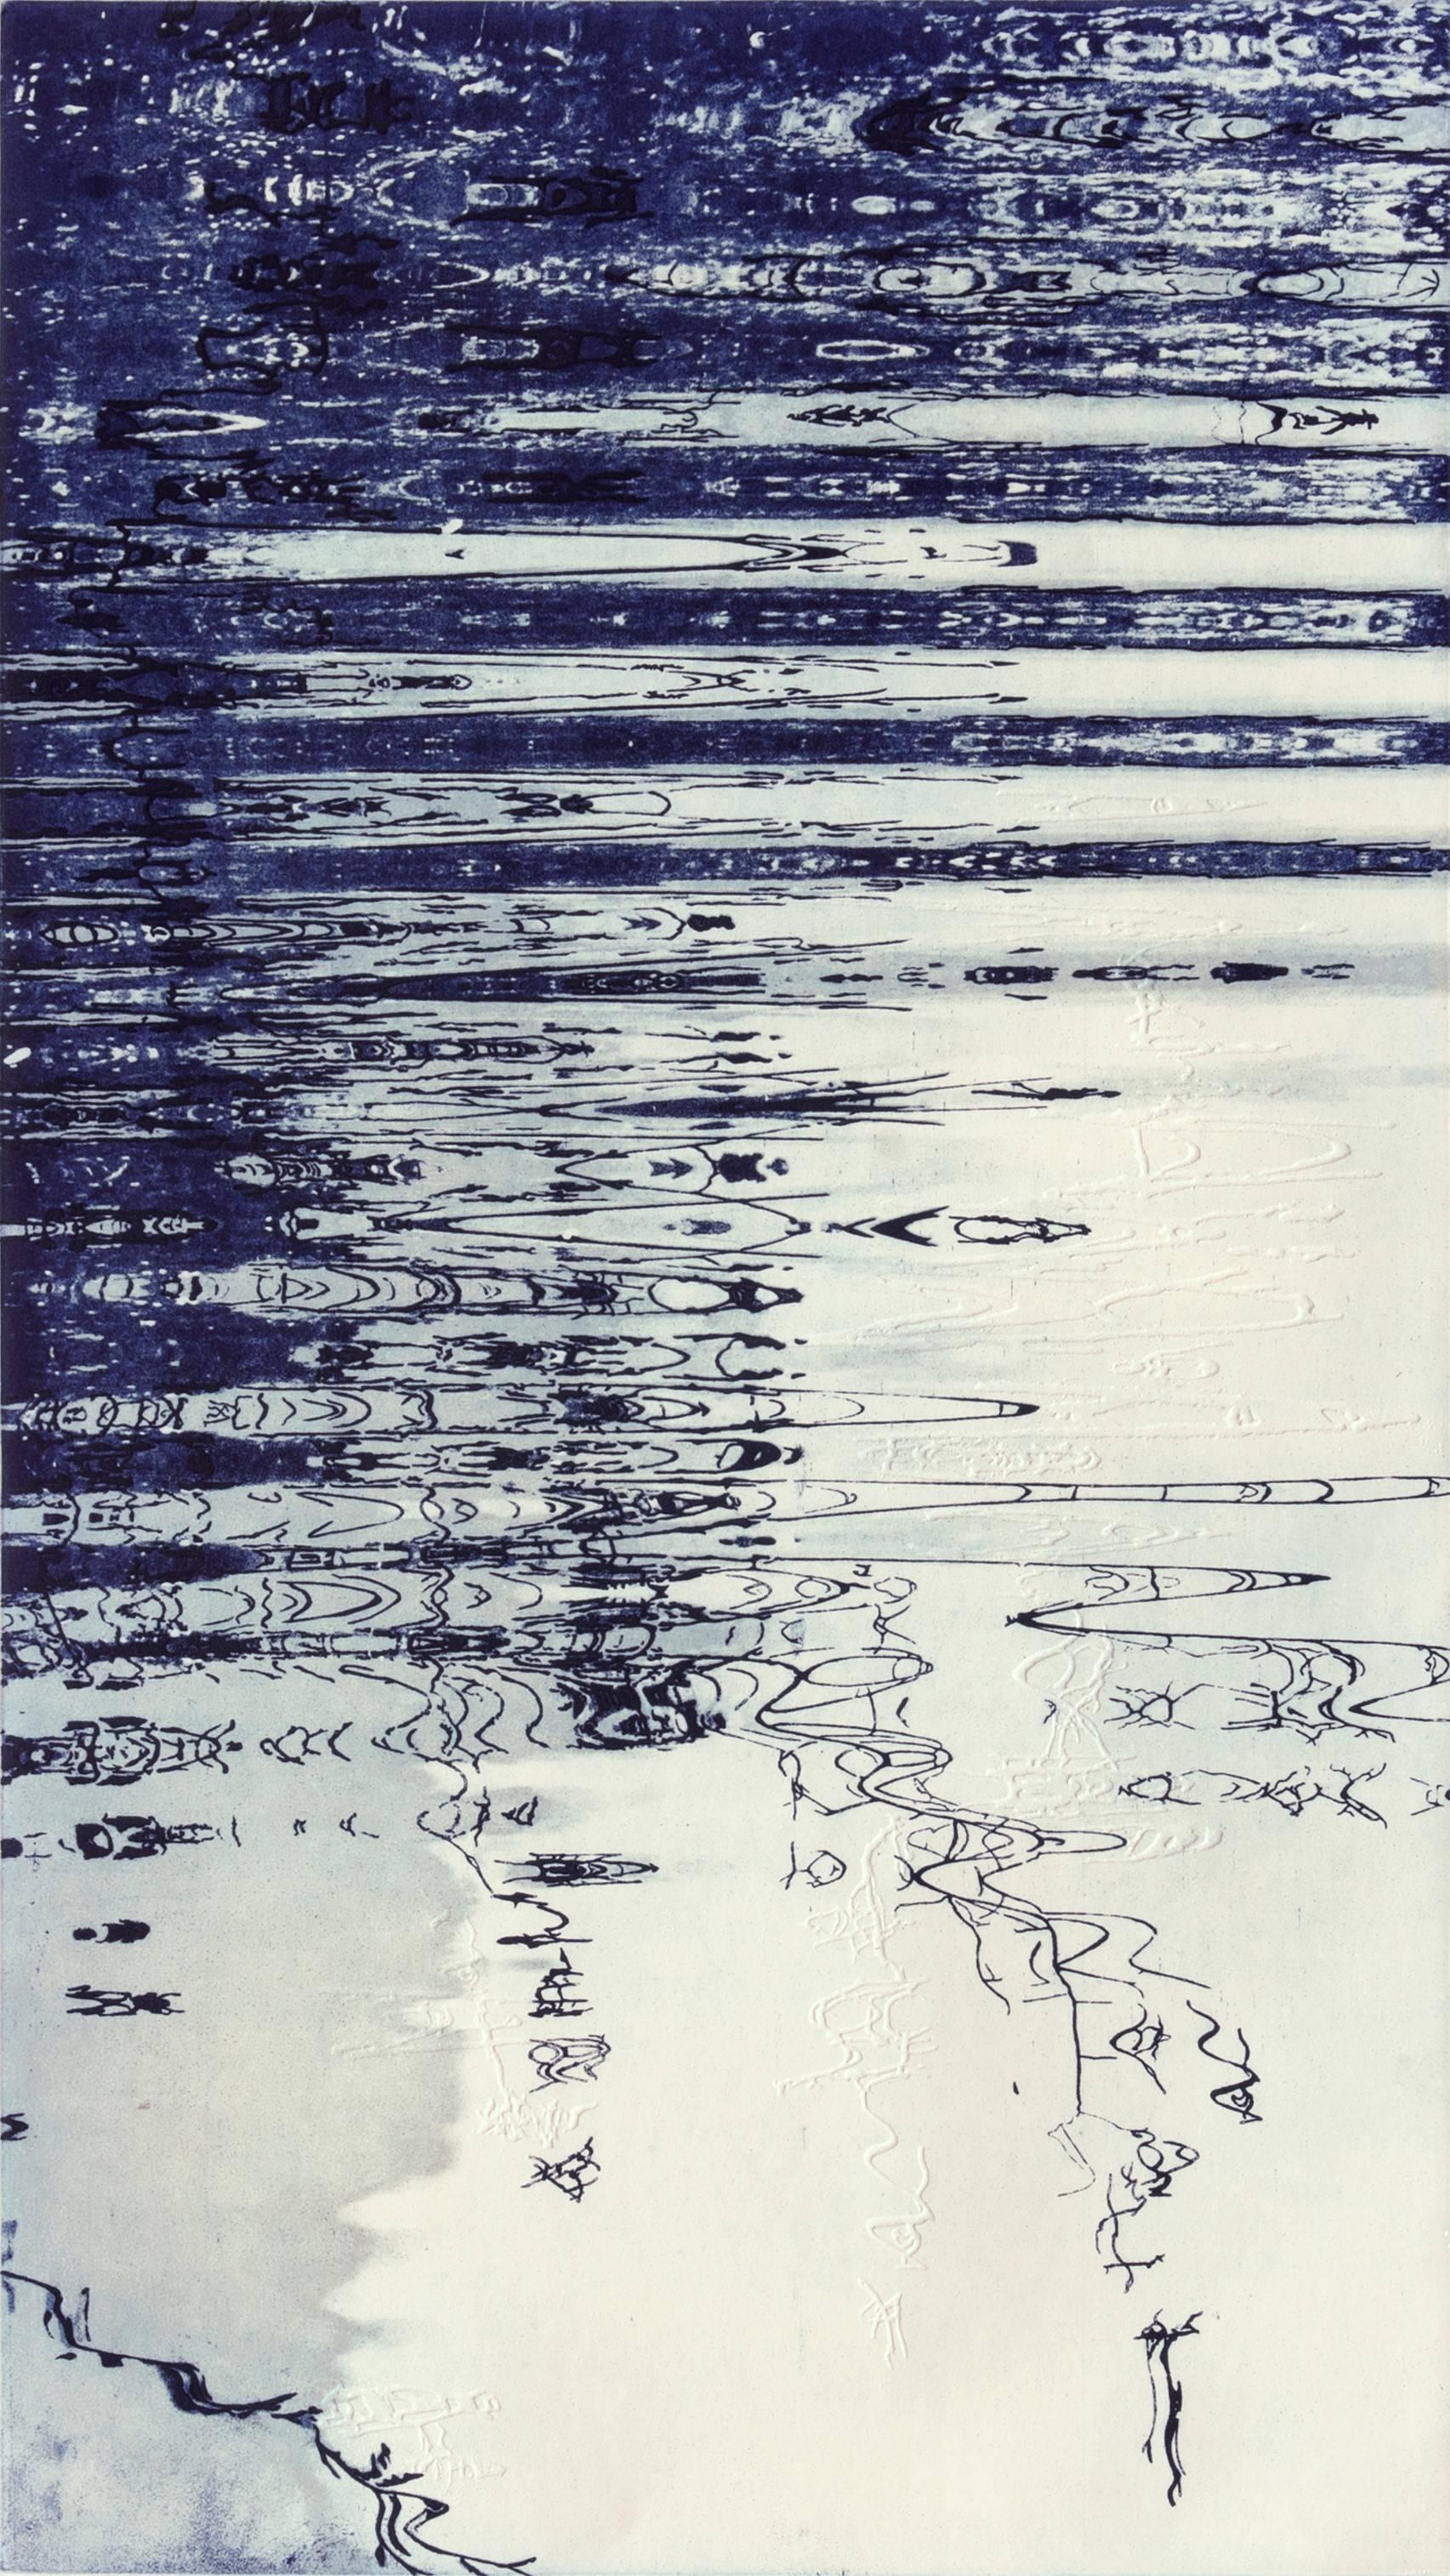 Trails of Water II - 28' X 16" Etching Limited Edition of 50 - Print by Patricia Claro